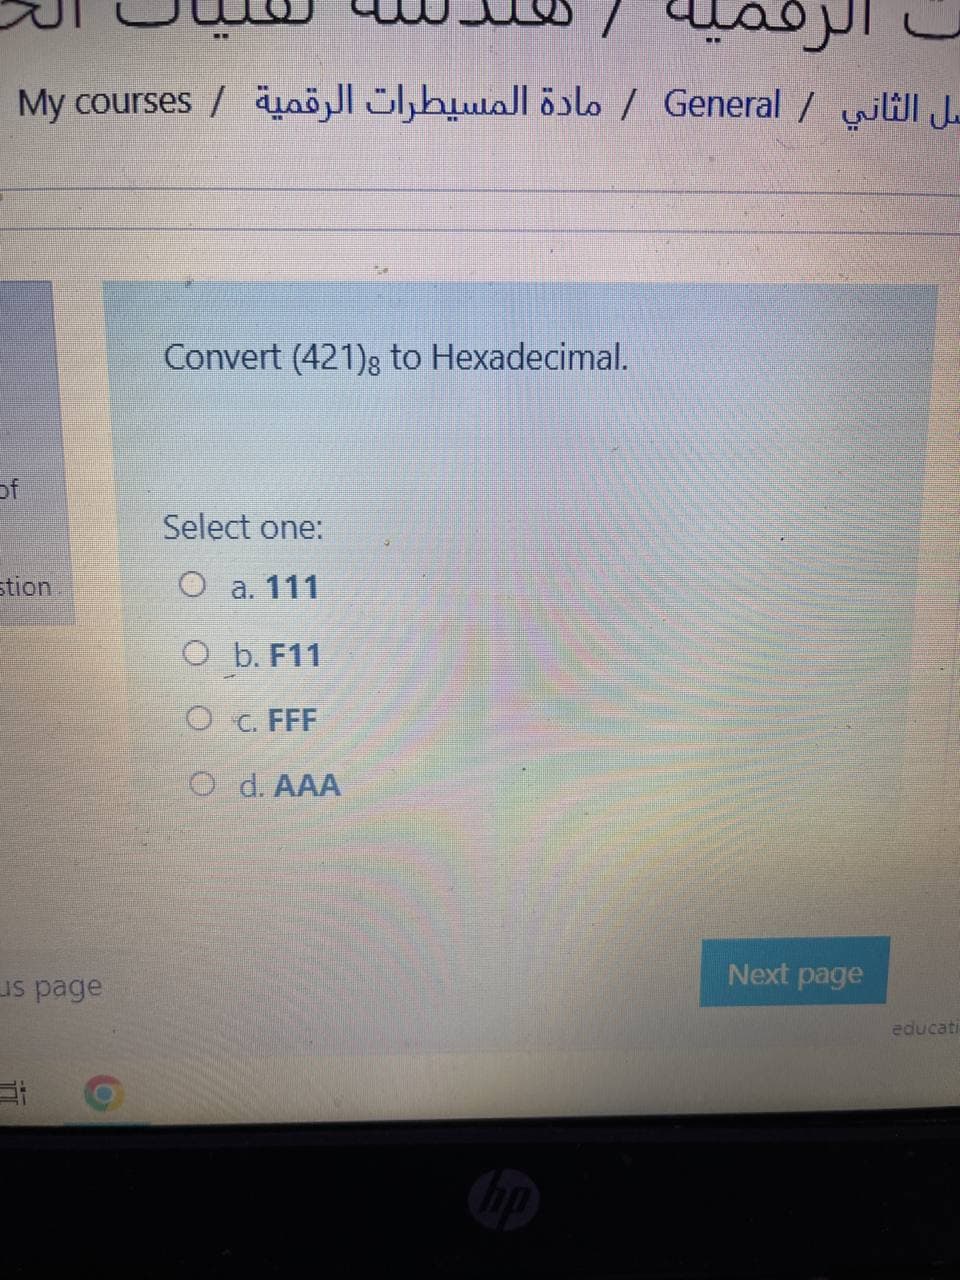 My courses / äuj ,hwall öslo / General / wiill Je
Convert (421)g to Hexadecimal.
of
Select one:
stion
O a. 111
O b. F11
O c. FFF
O d. AAA
Next page
us page
educati
